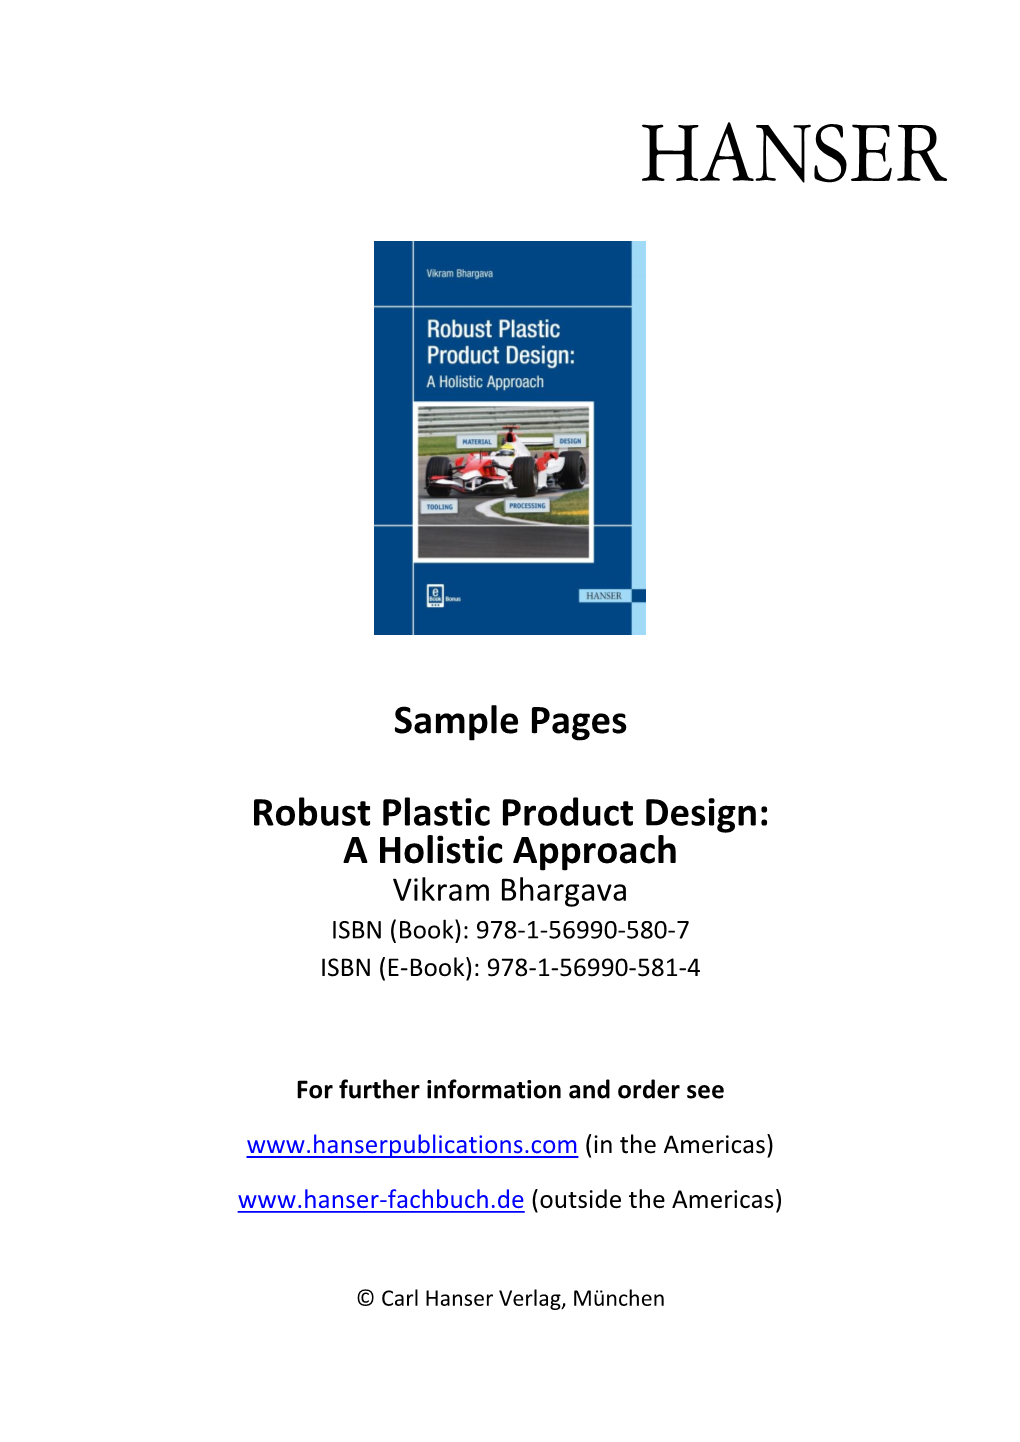 Sample Pages Robust Plastic Product Design: a Holistic Approach